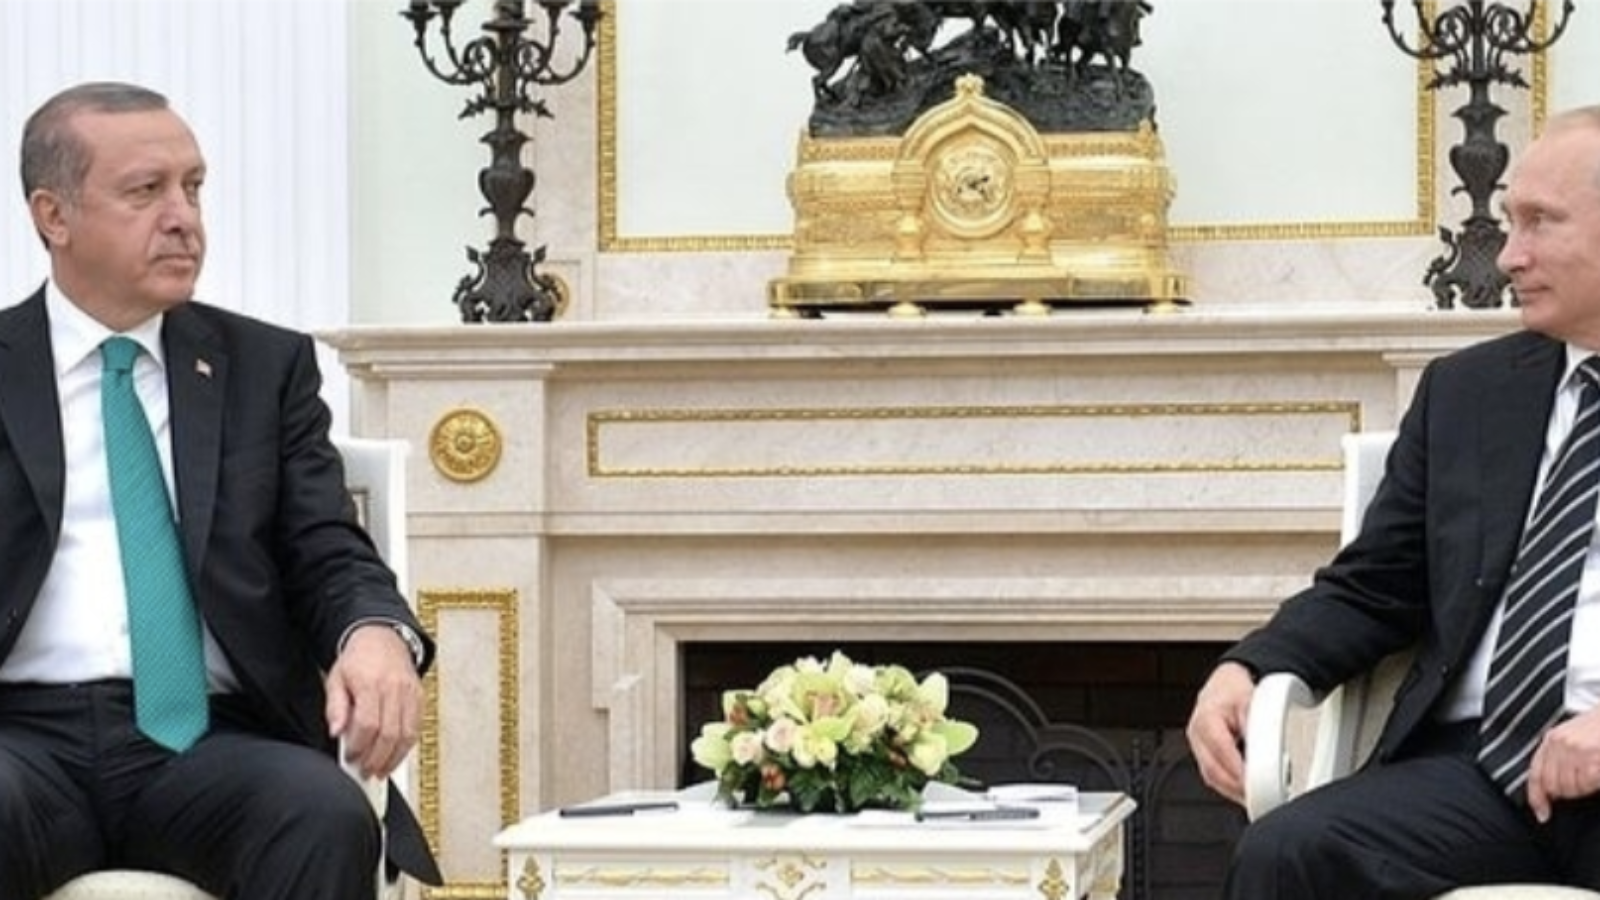 Putin and Erdogan sit in chairs in front of an ornate fireplace.